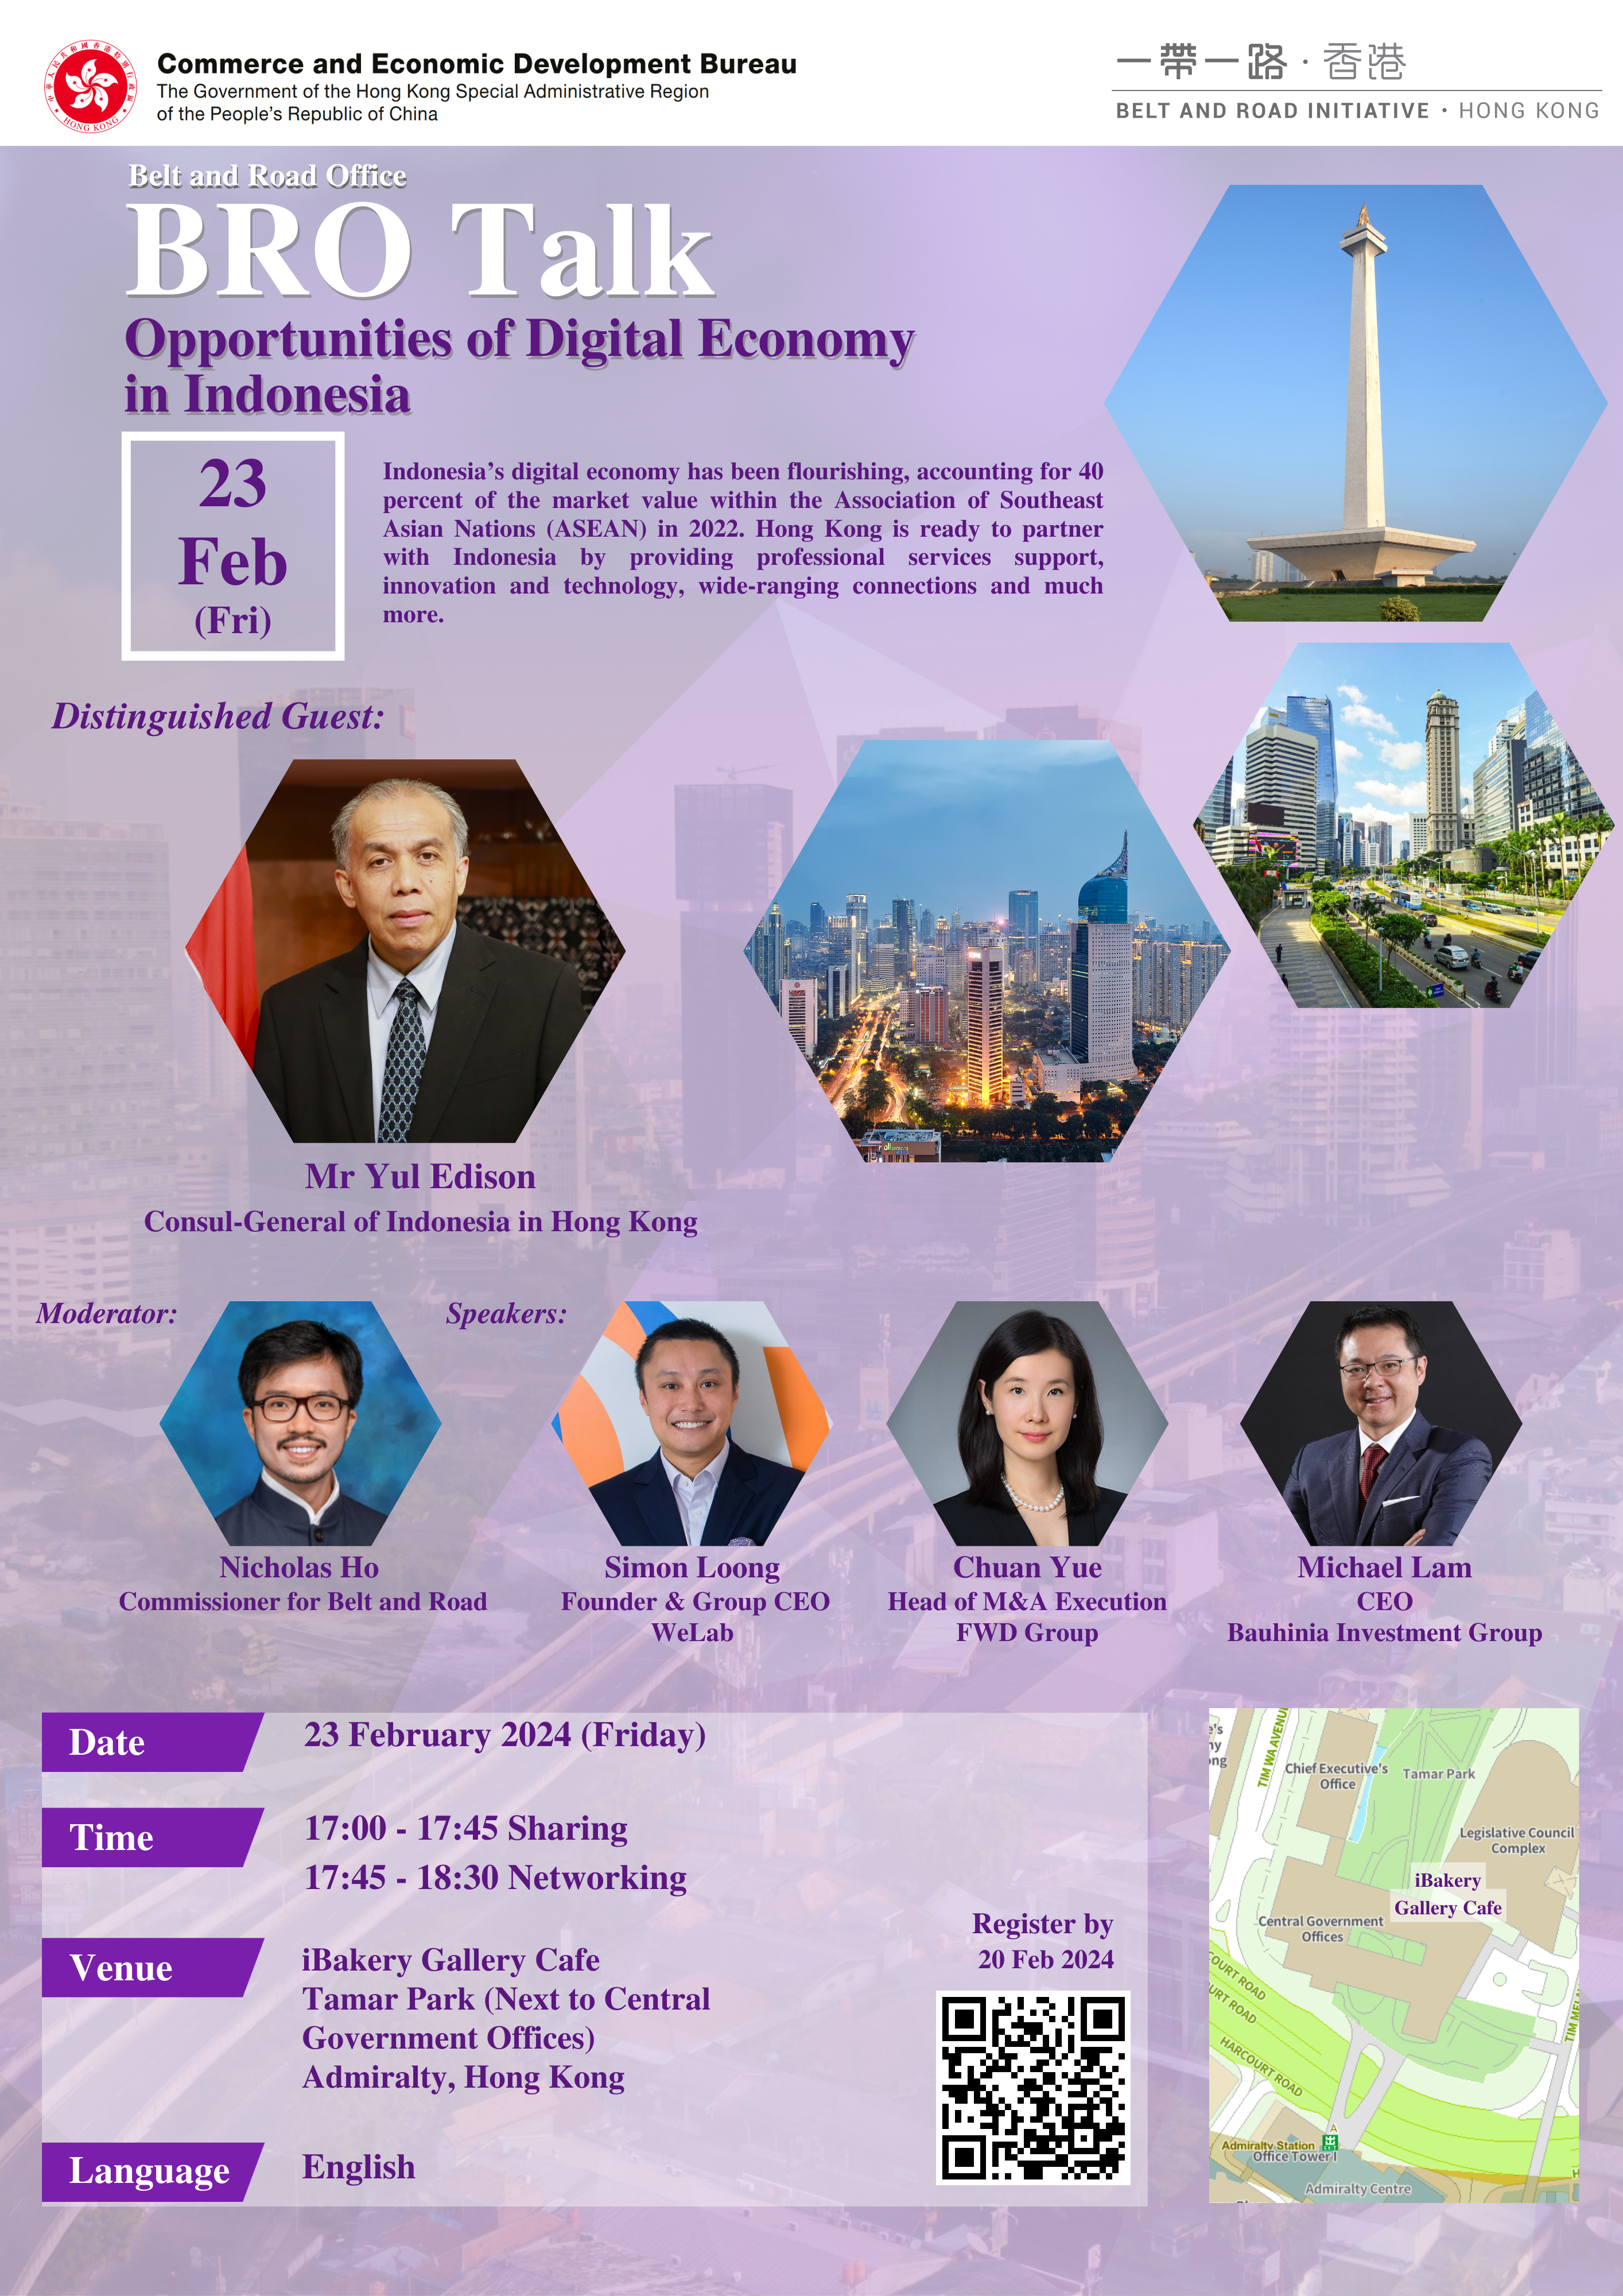 Belt and Road Office Talk - Opportunities of Digital Economy in Indonesia